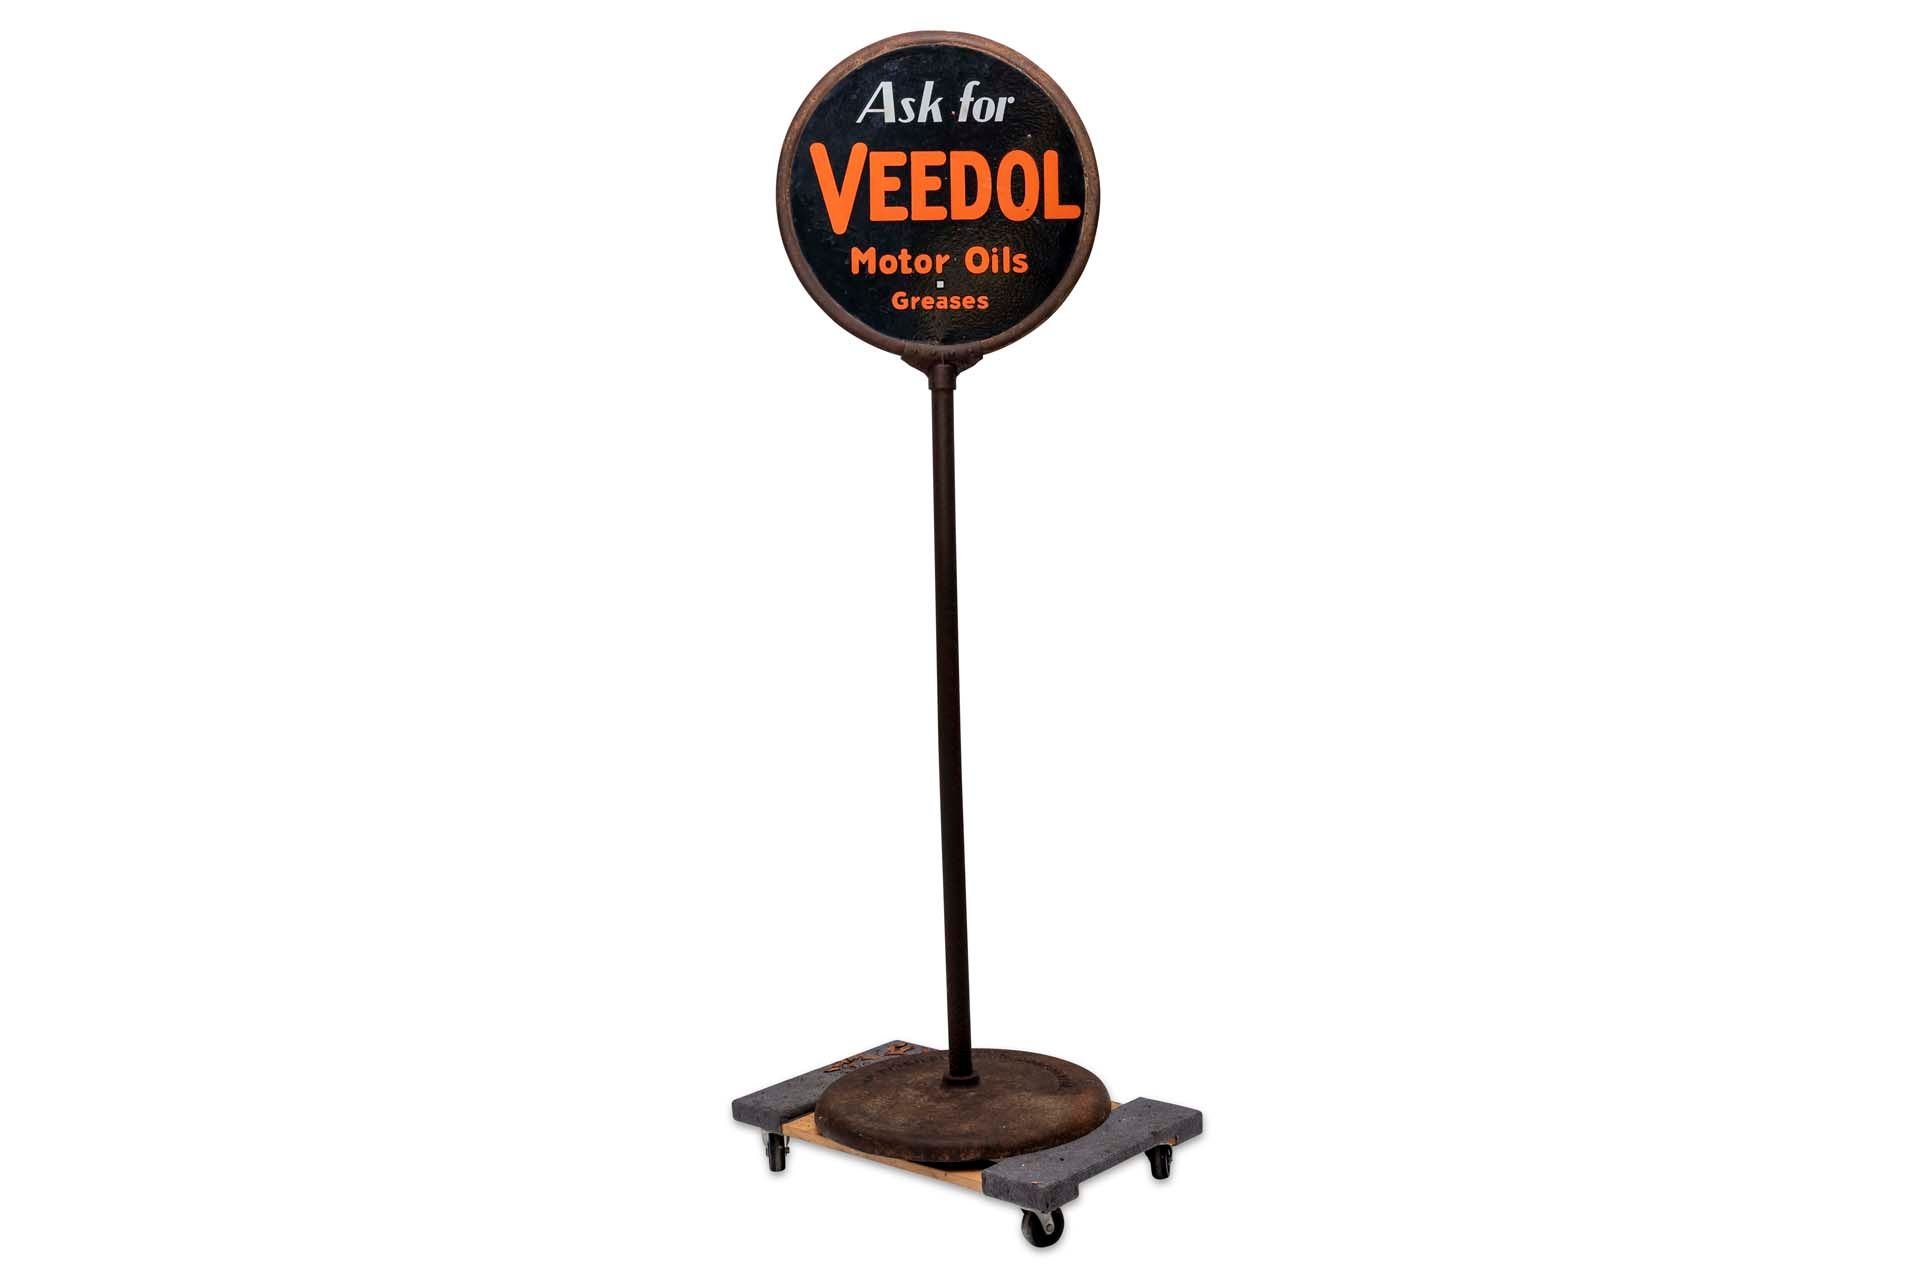 For Sale 'Veedol Motoroil' Upright Gas Station Display, Double-sided